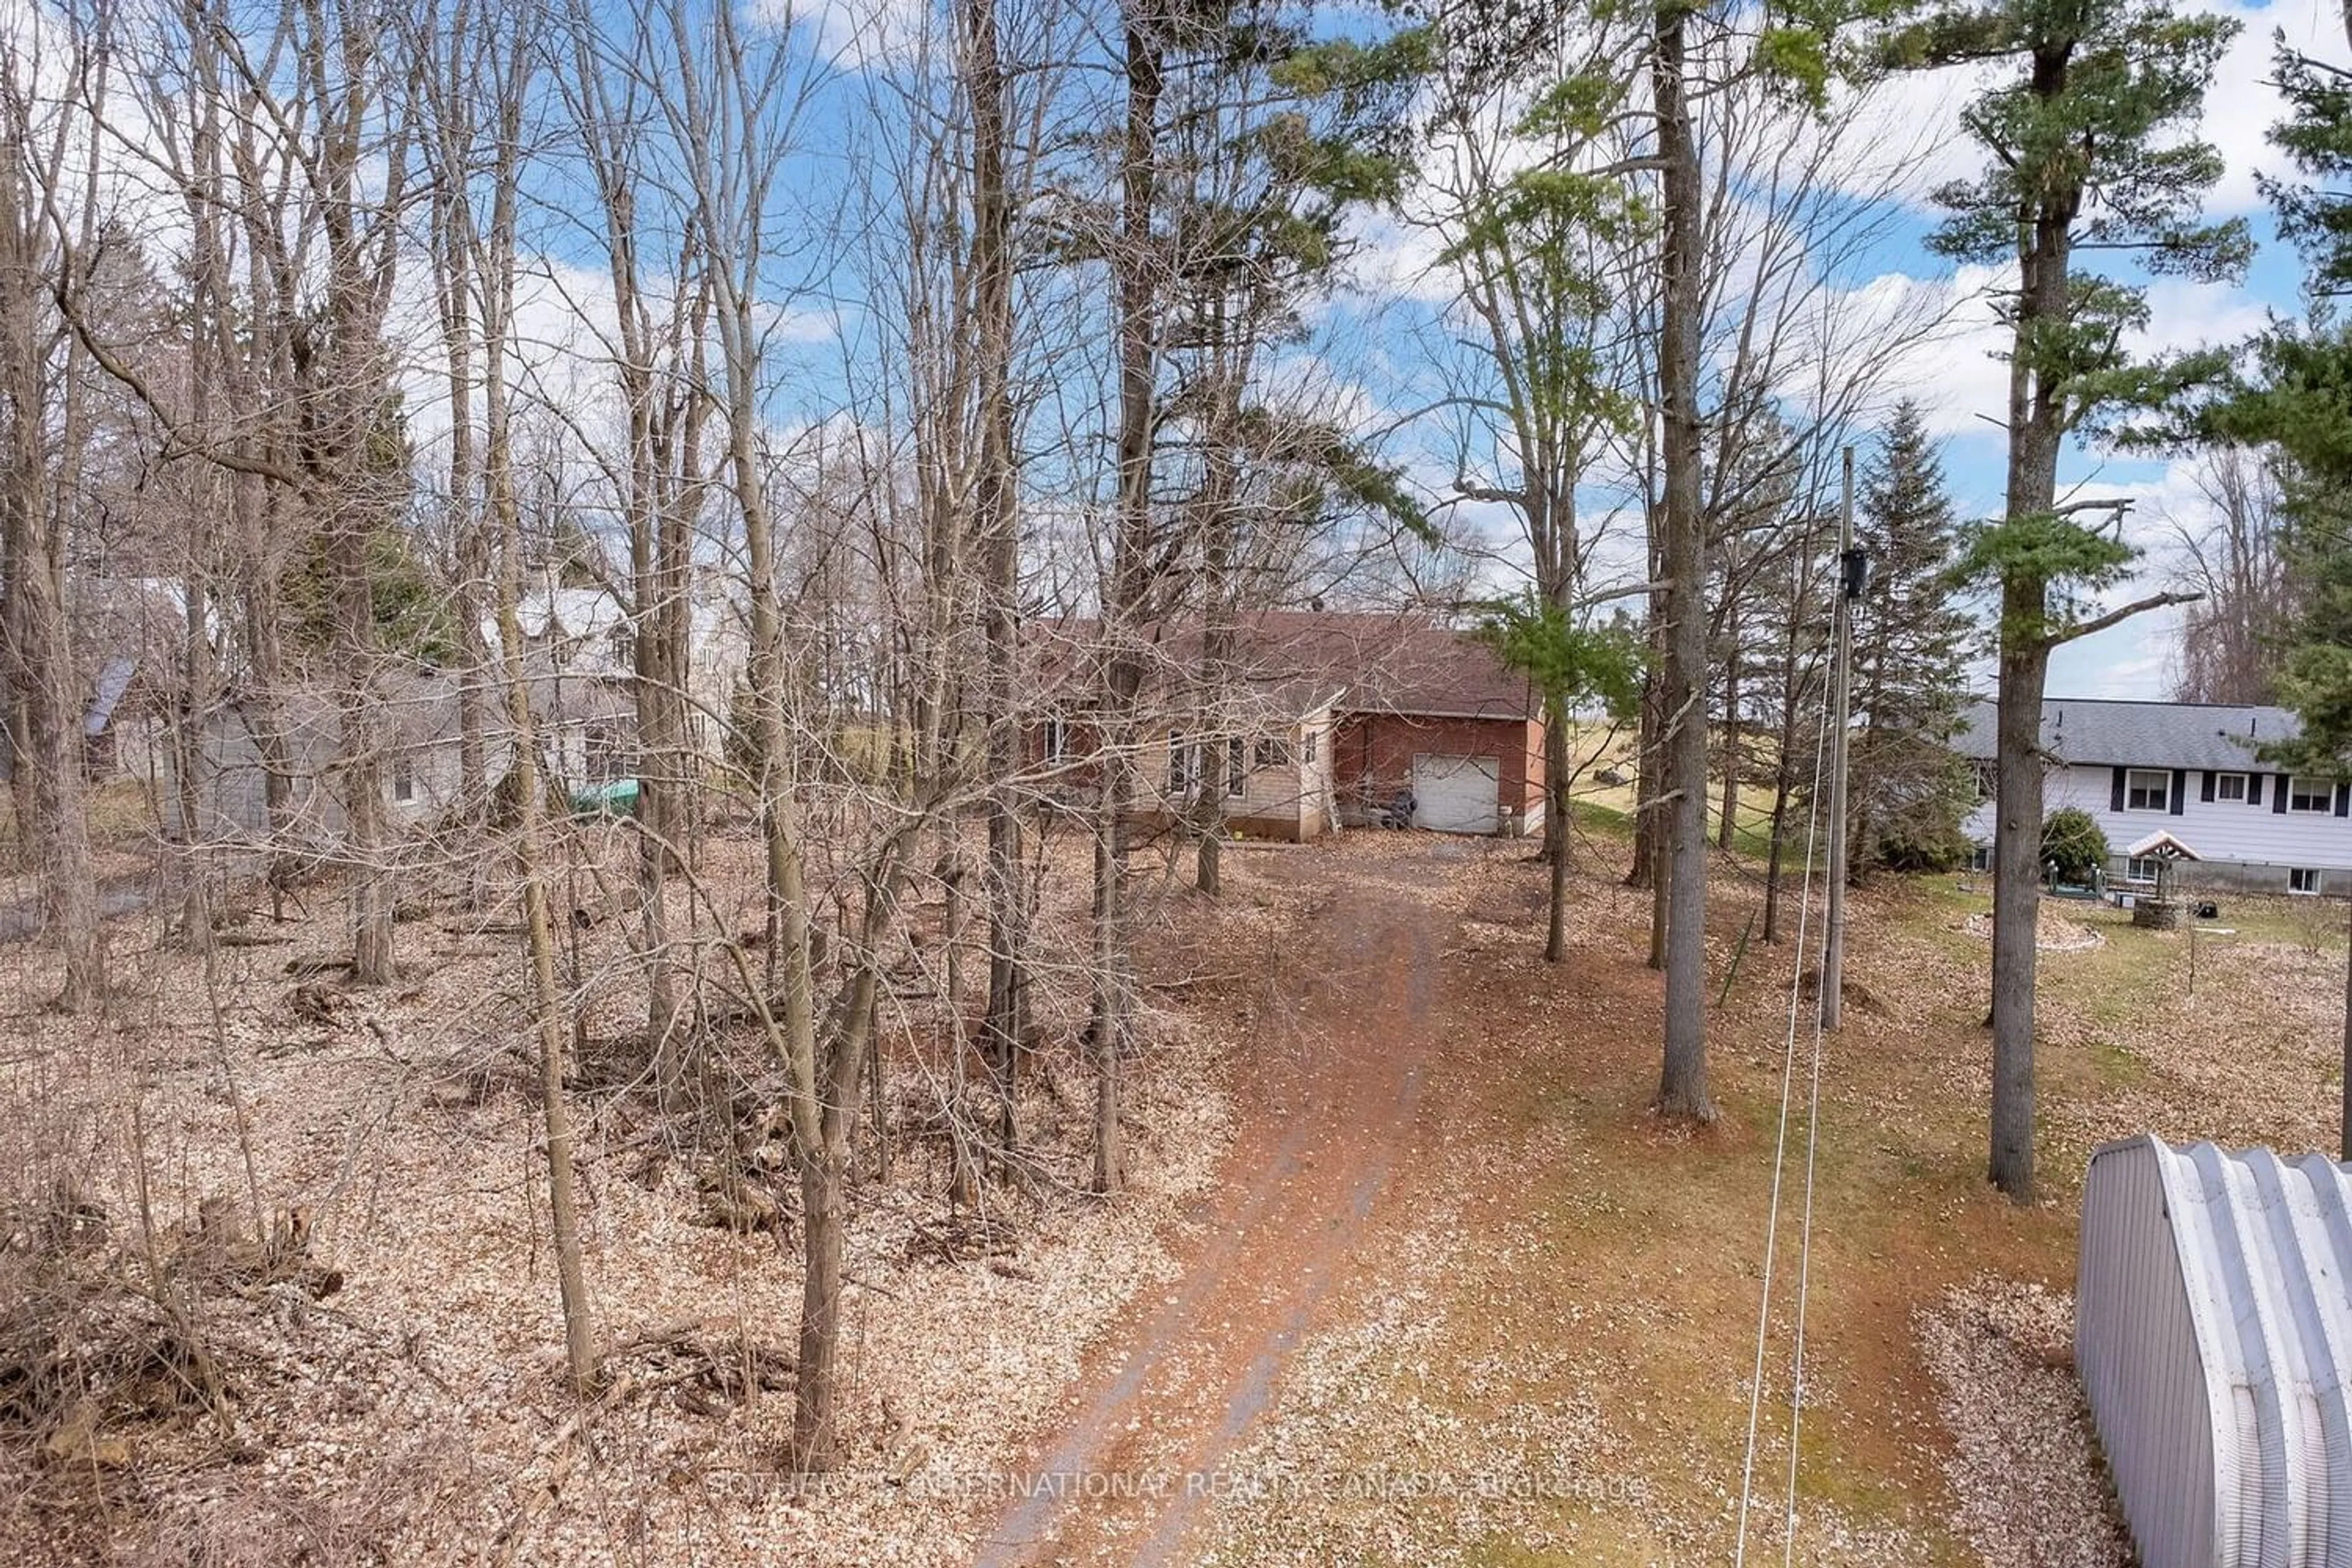 Cottage for 20820 South Service Rd, South Glengarry Ontario K0C 1N0